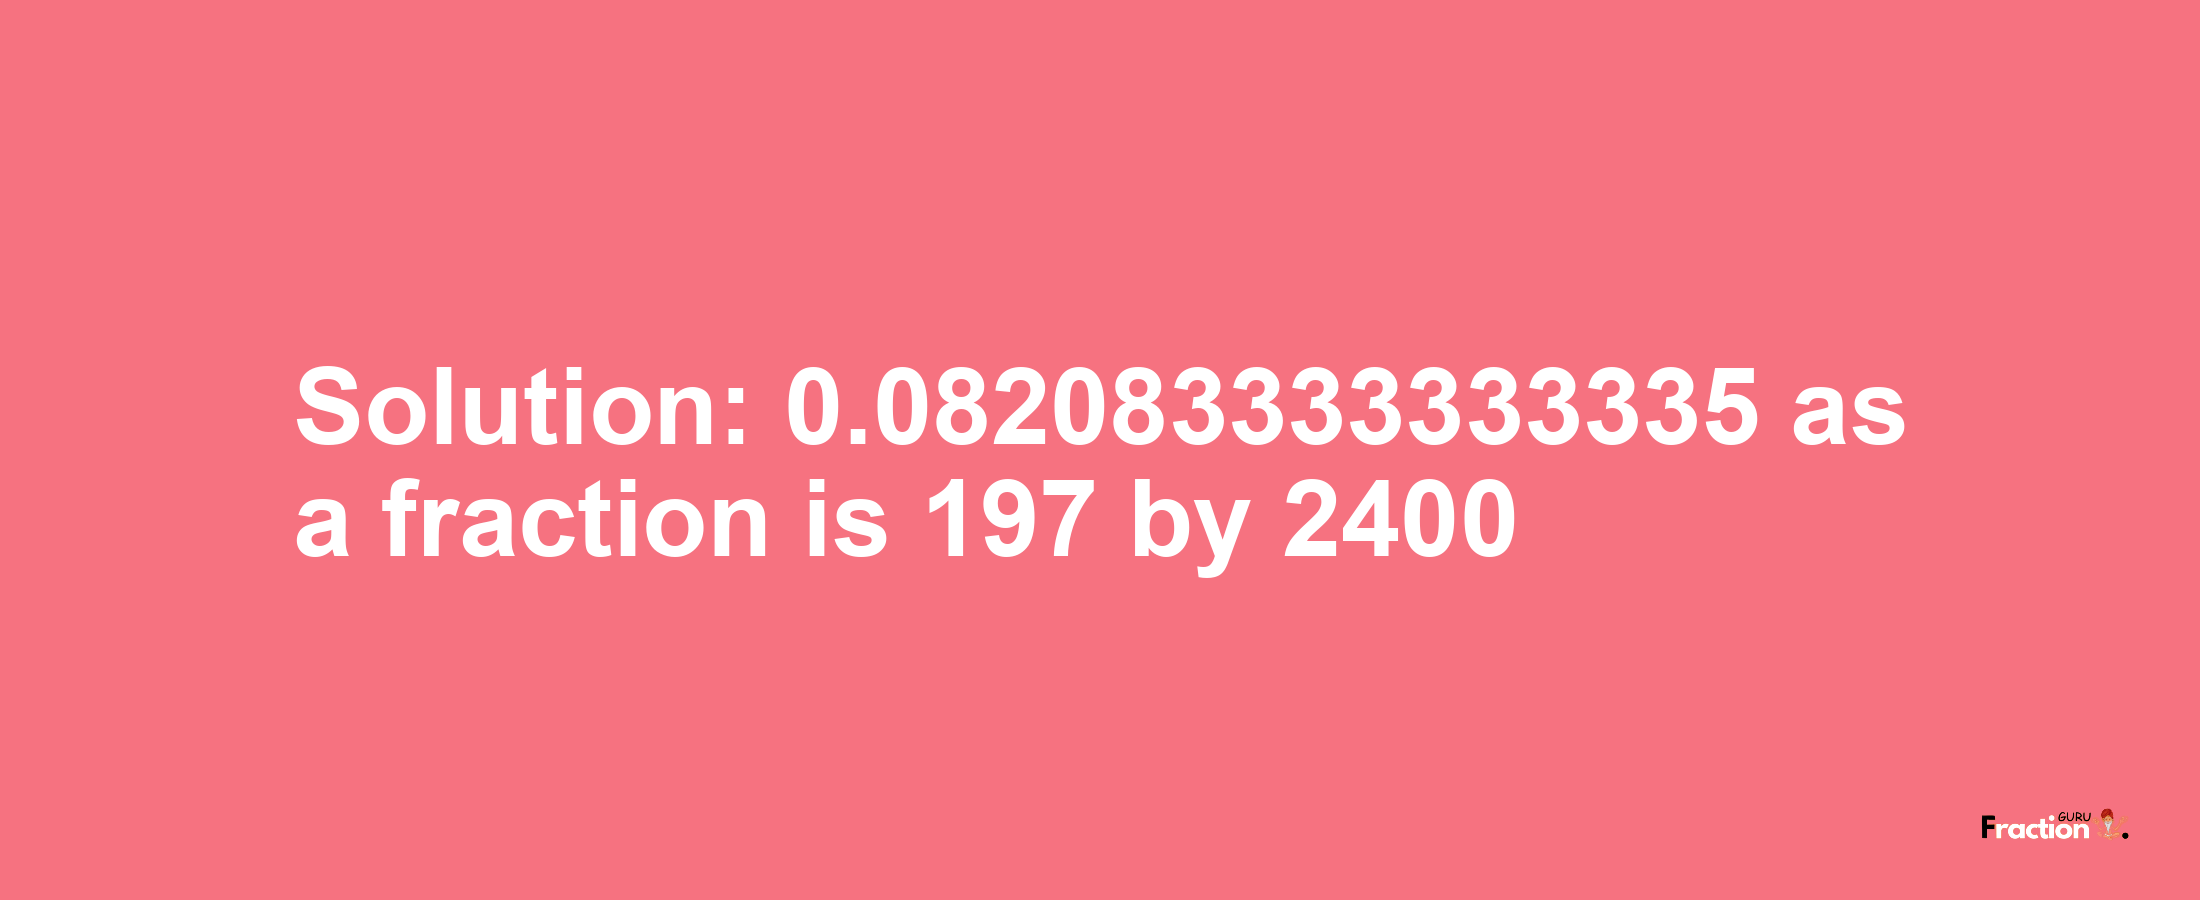 Solution:0.082083333333335 as a fraction is 197/2400